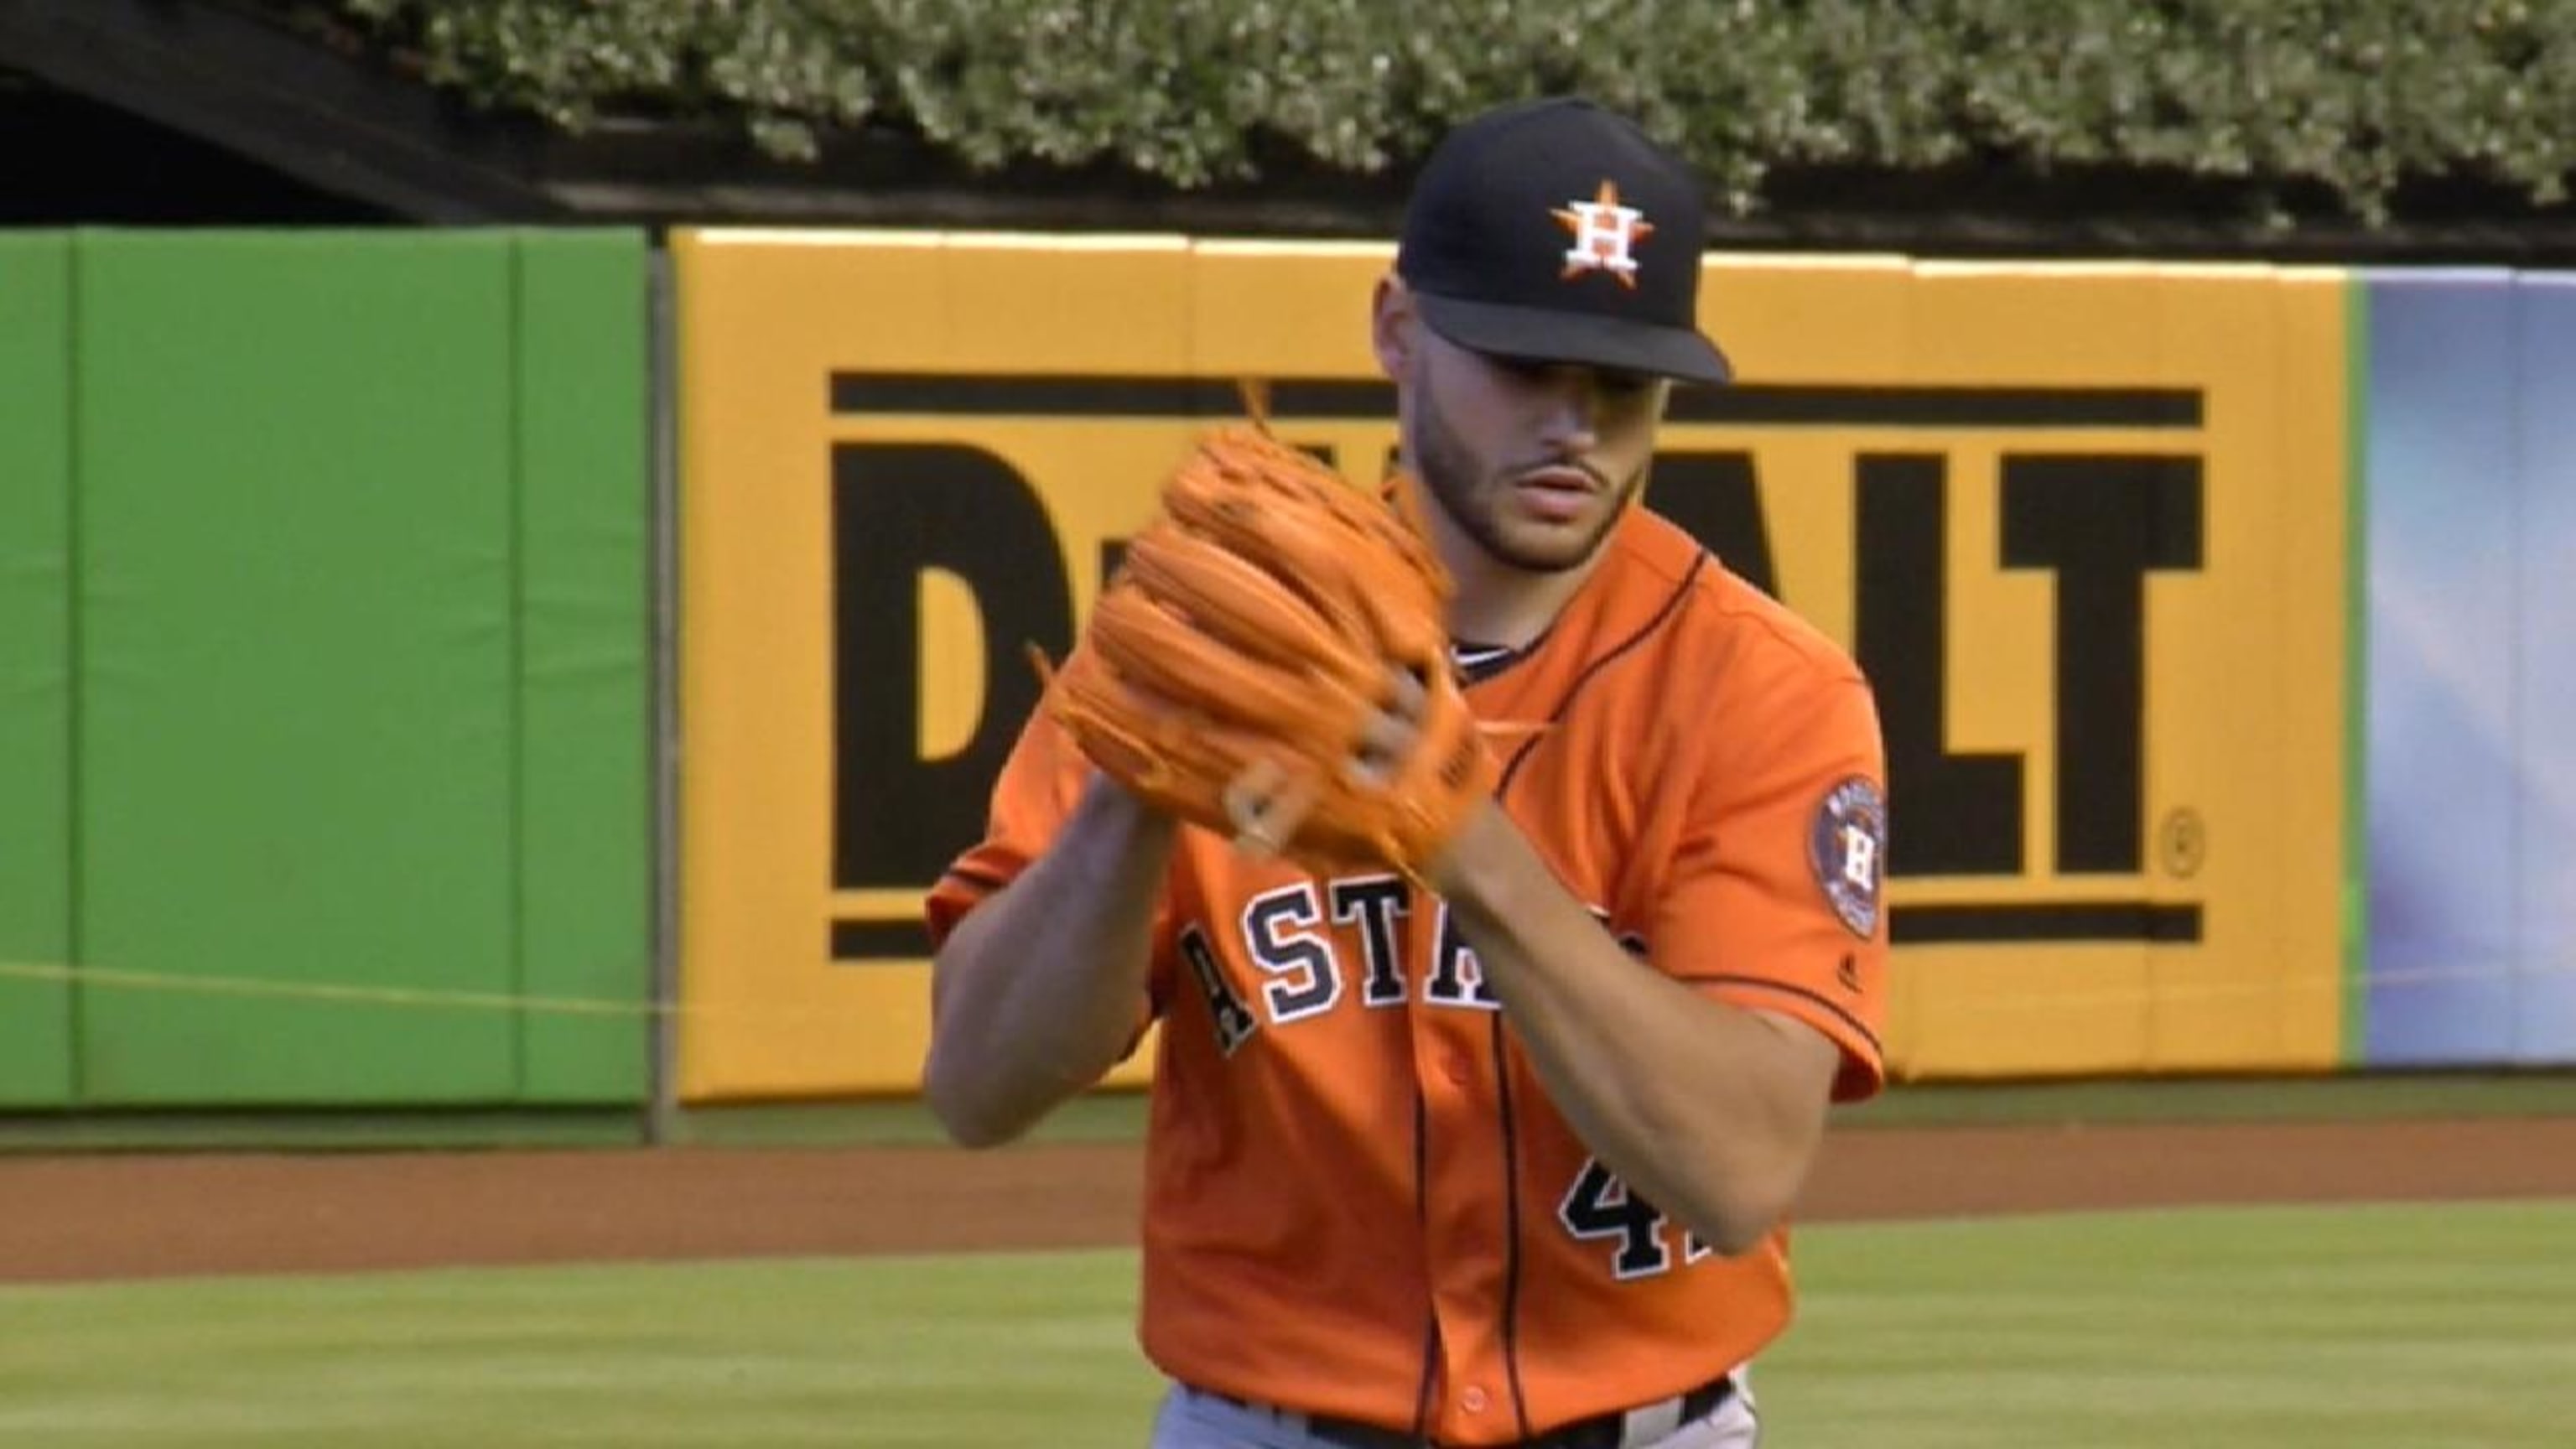 saw this on Twitter with lance McCullers with the Astros unis